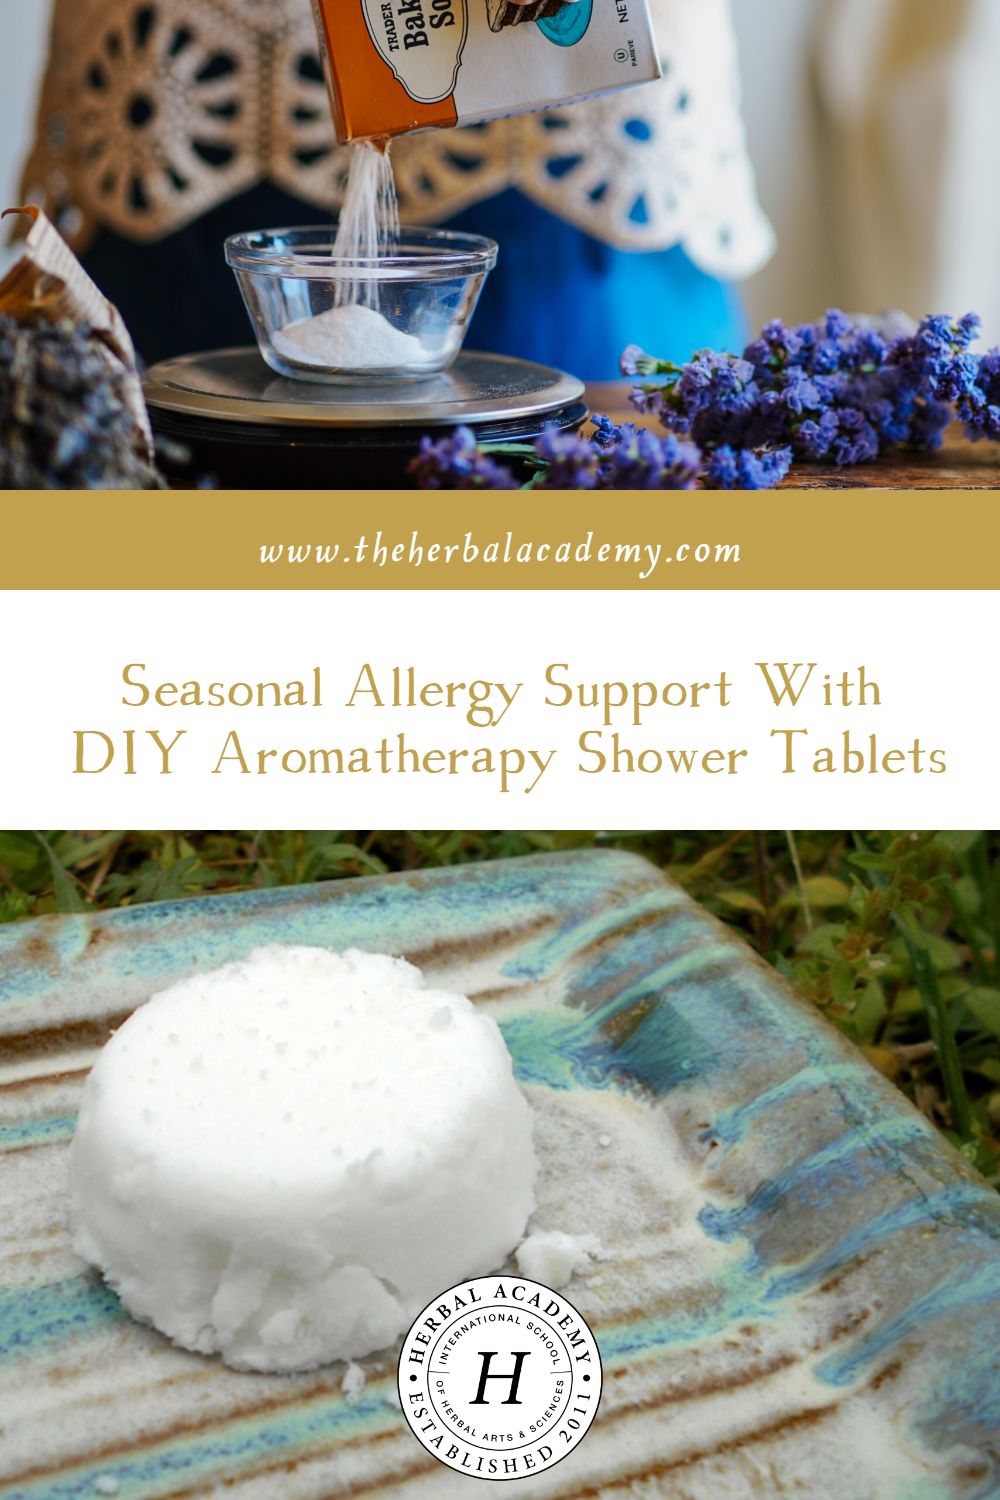 Seasonal Allergy Support With DIY Aromatherapy Shower Tablets | Herbal Academy | Stay well with herbs! Aromatherapy Shower Tablets are one of many seasonal allergy supports to try this spring.